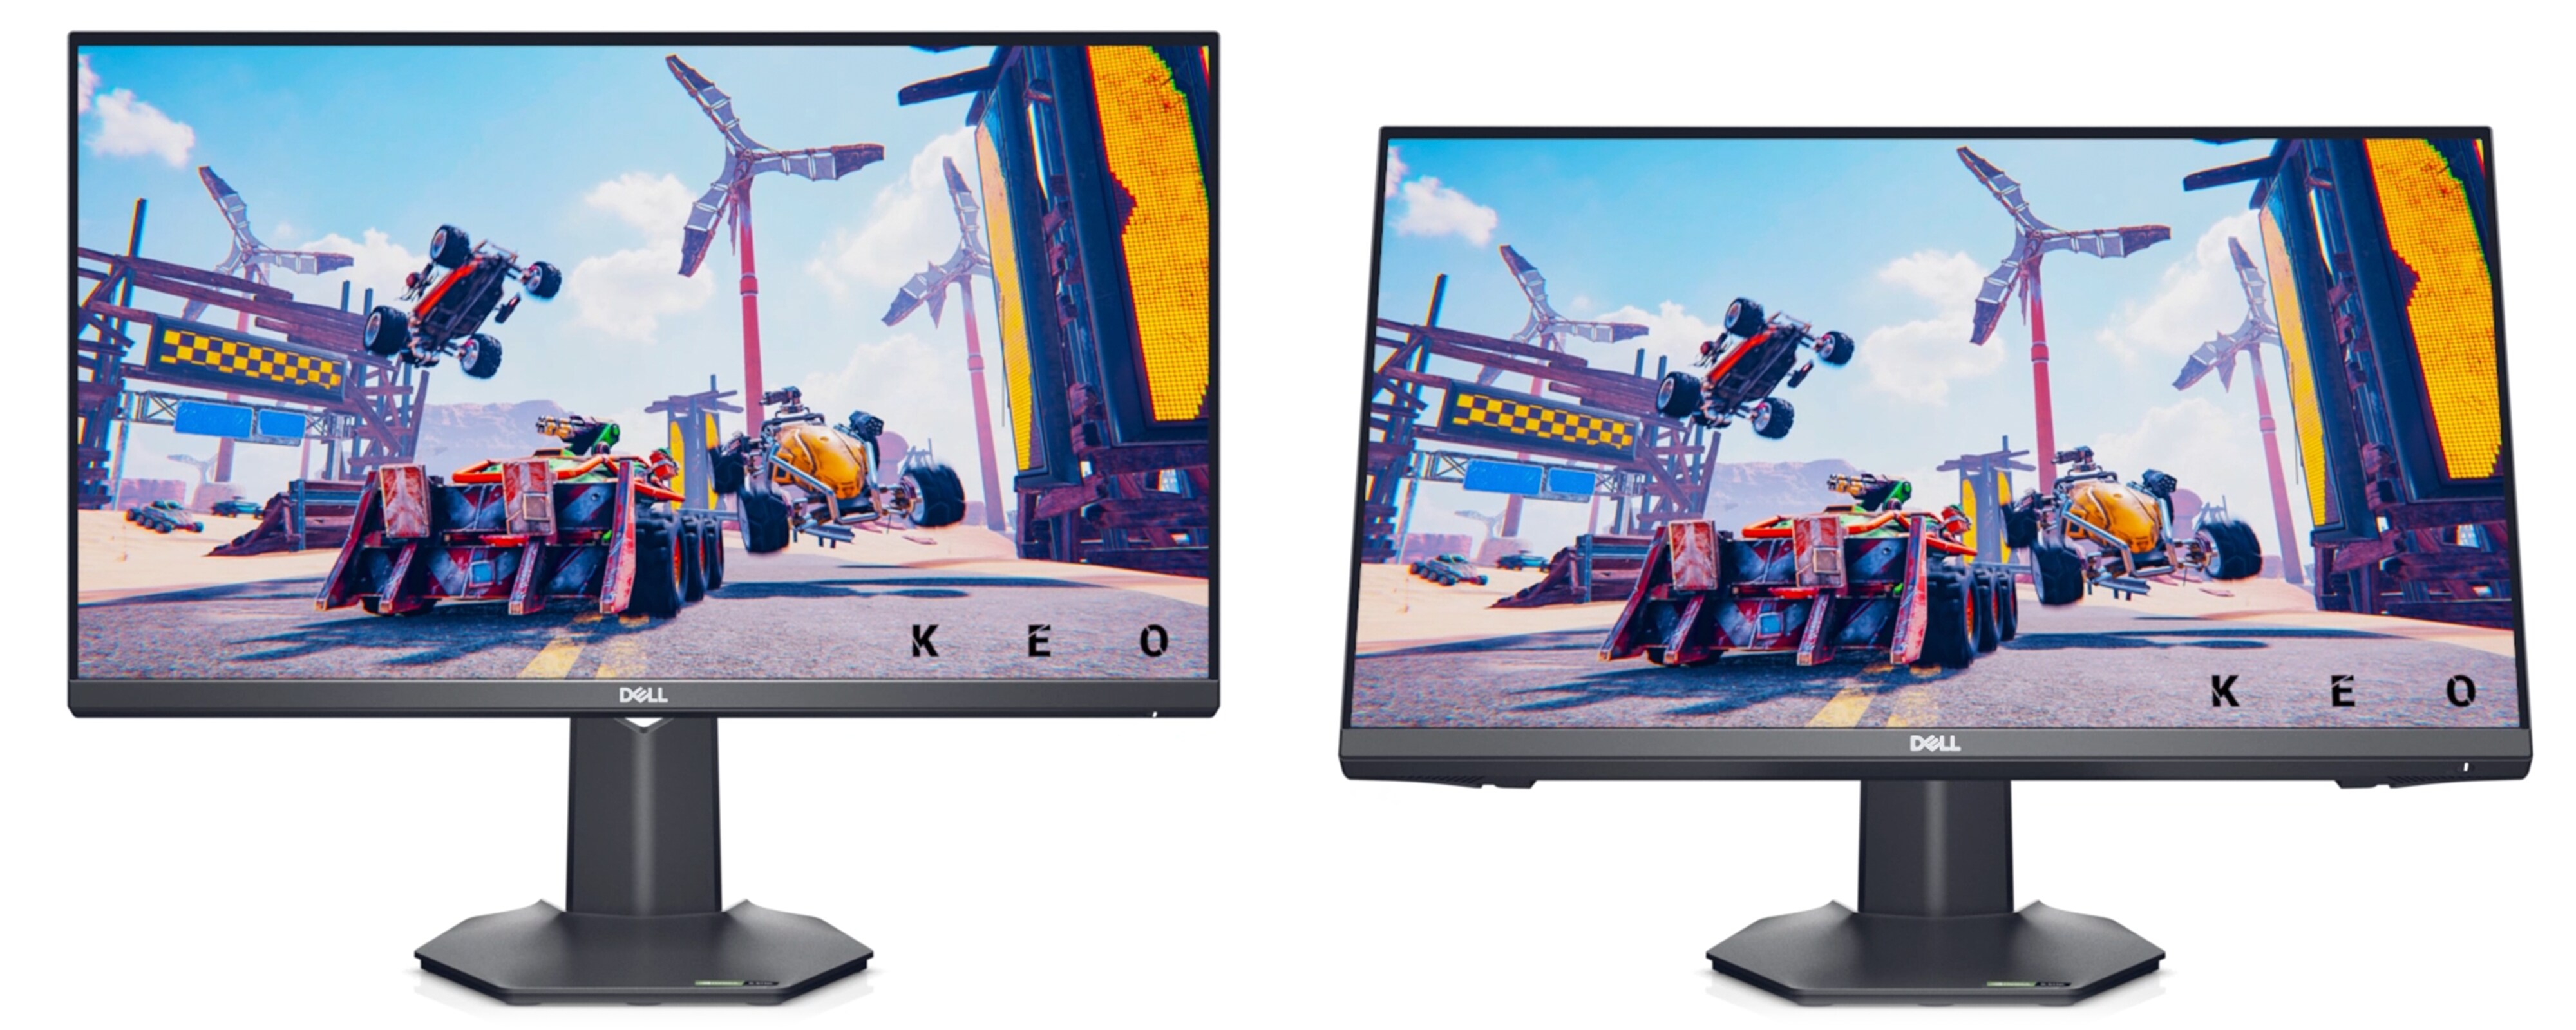 Picture of two Dell G2422HS Gaming Monitors on a white background with a KEO game image on both screens.